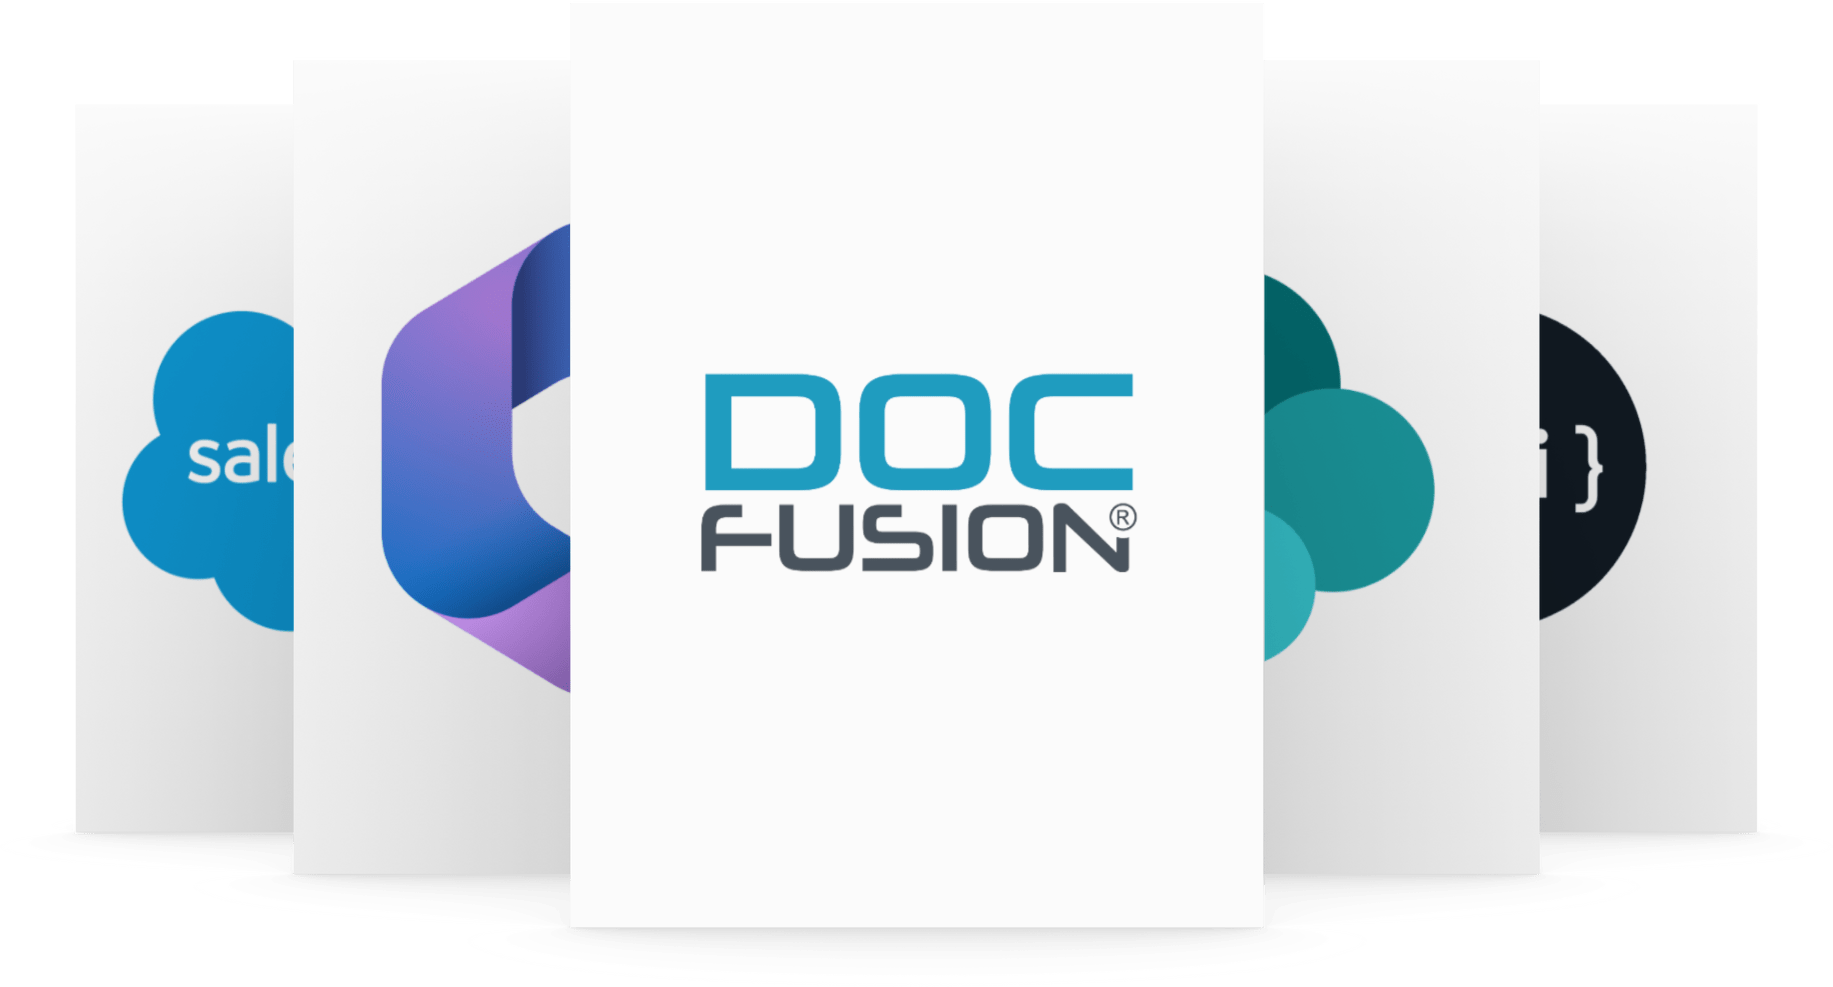 DocFusion logo together with the logos of the software it integrates with